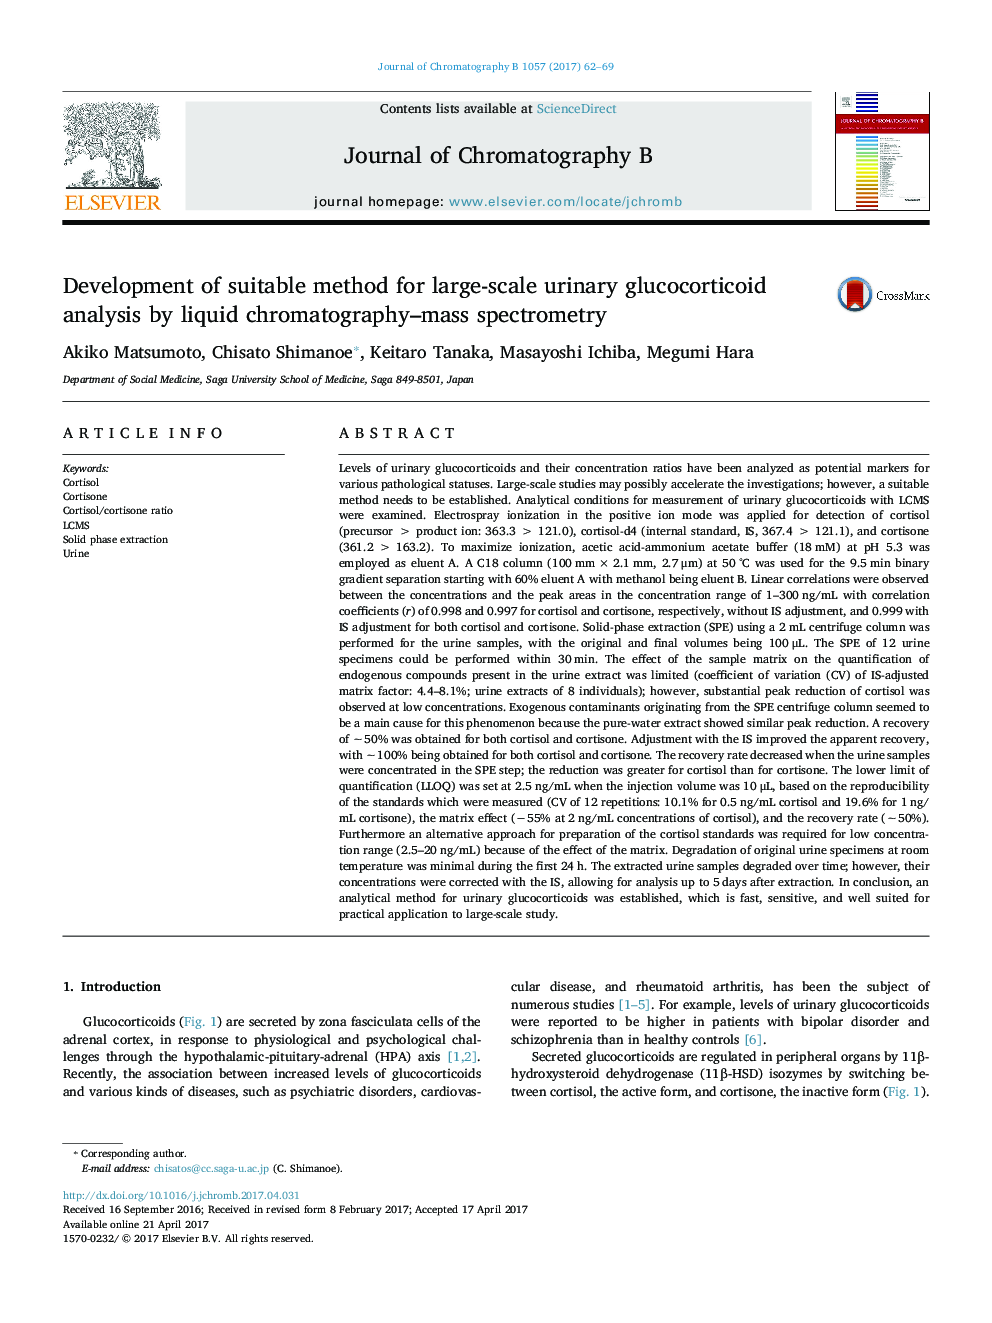 Development of suitable method for large-scale urinary glucocorticoid analysis by liquid chromatography-mass spectrometry